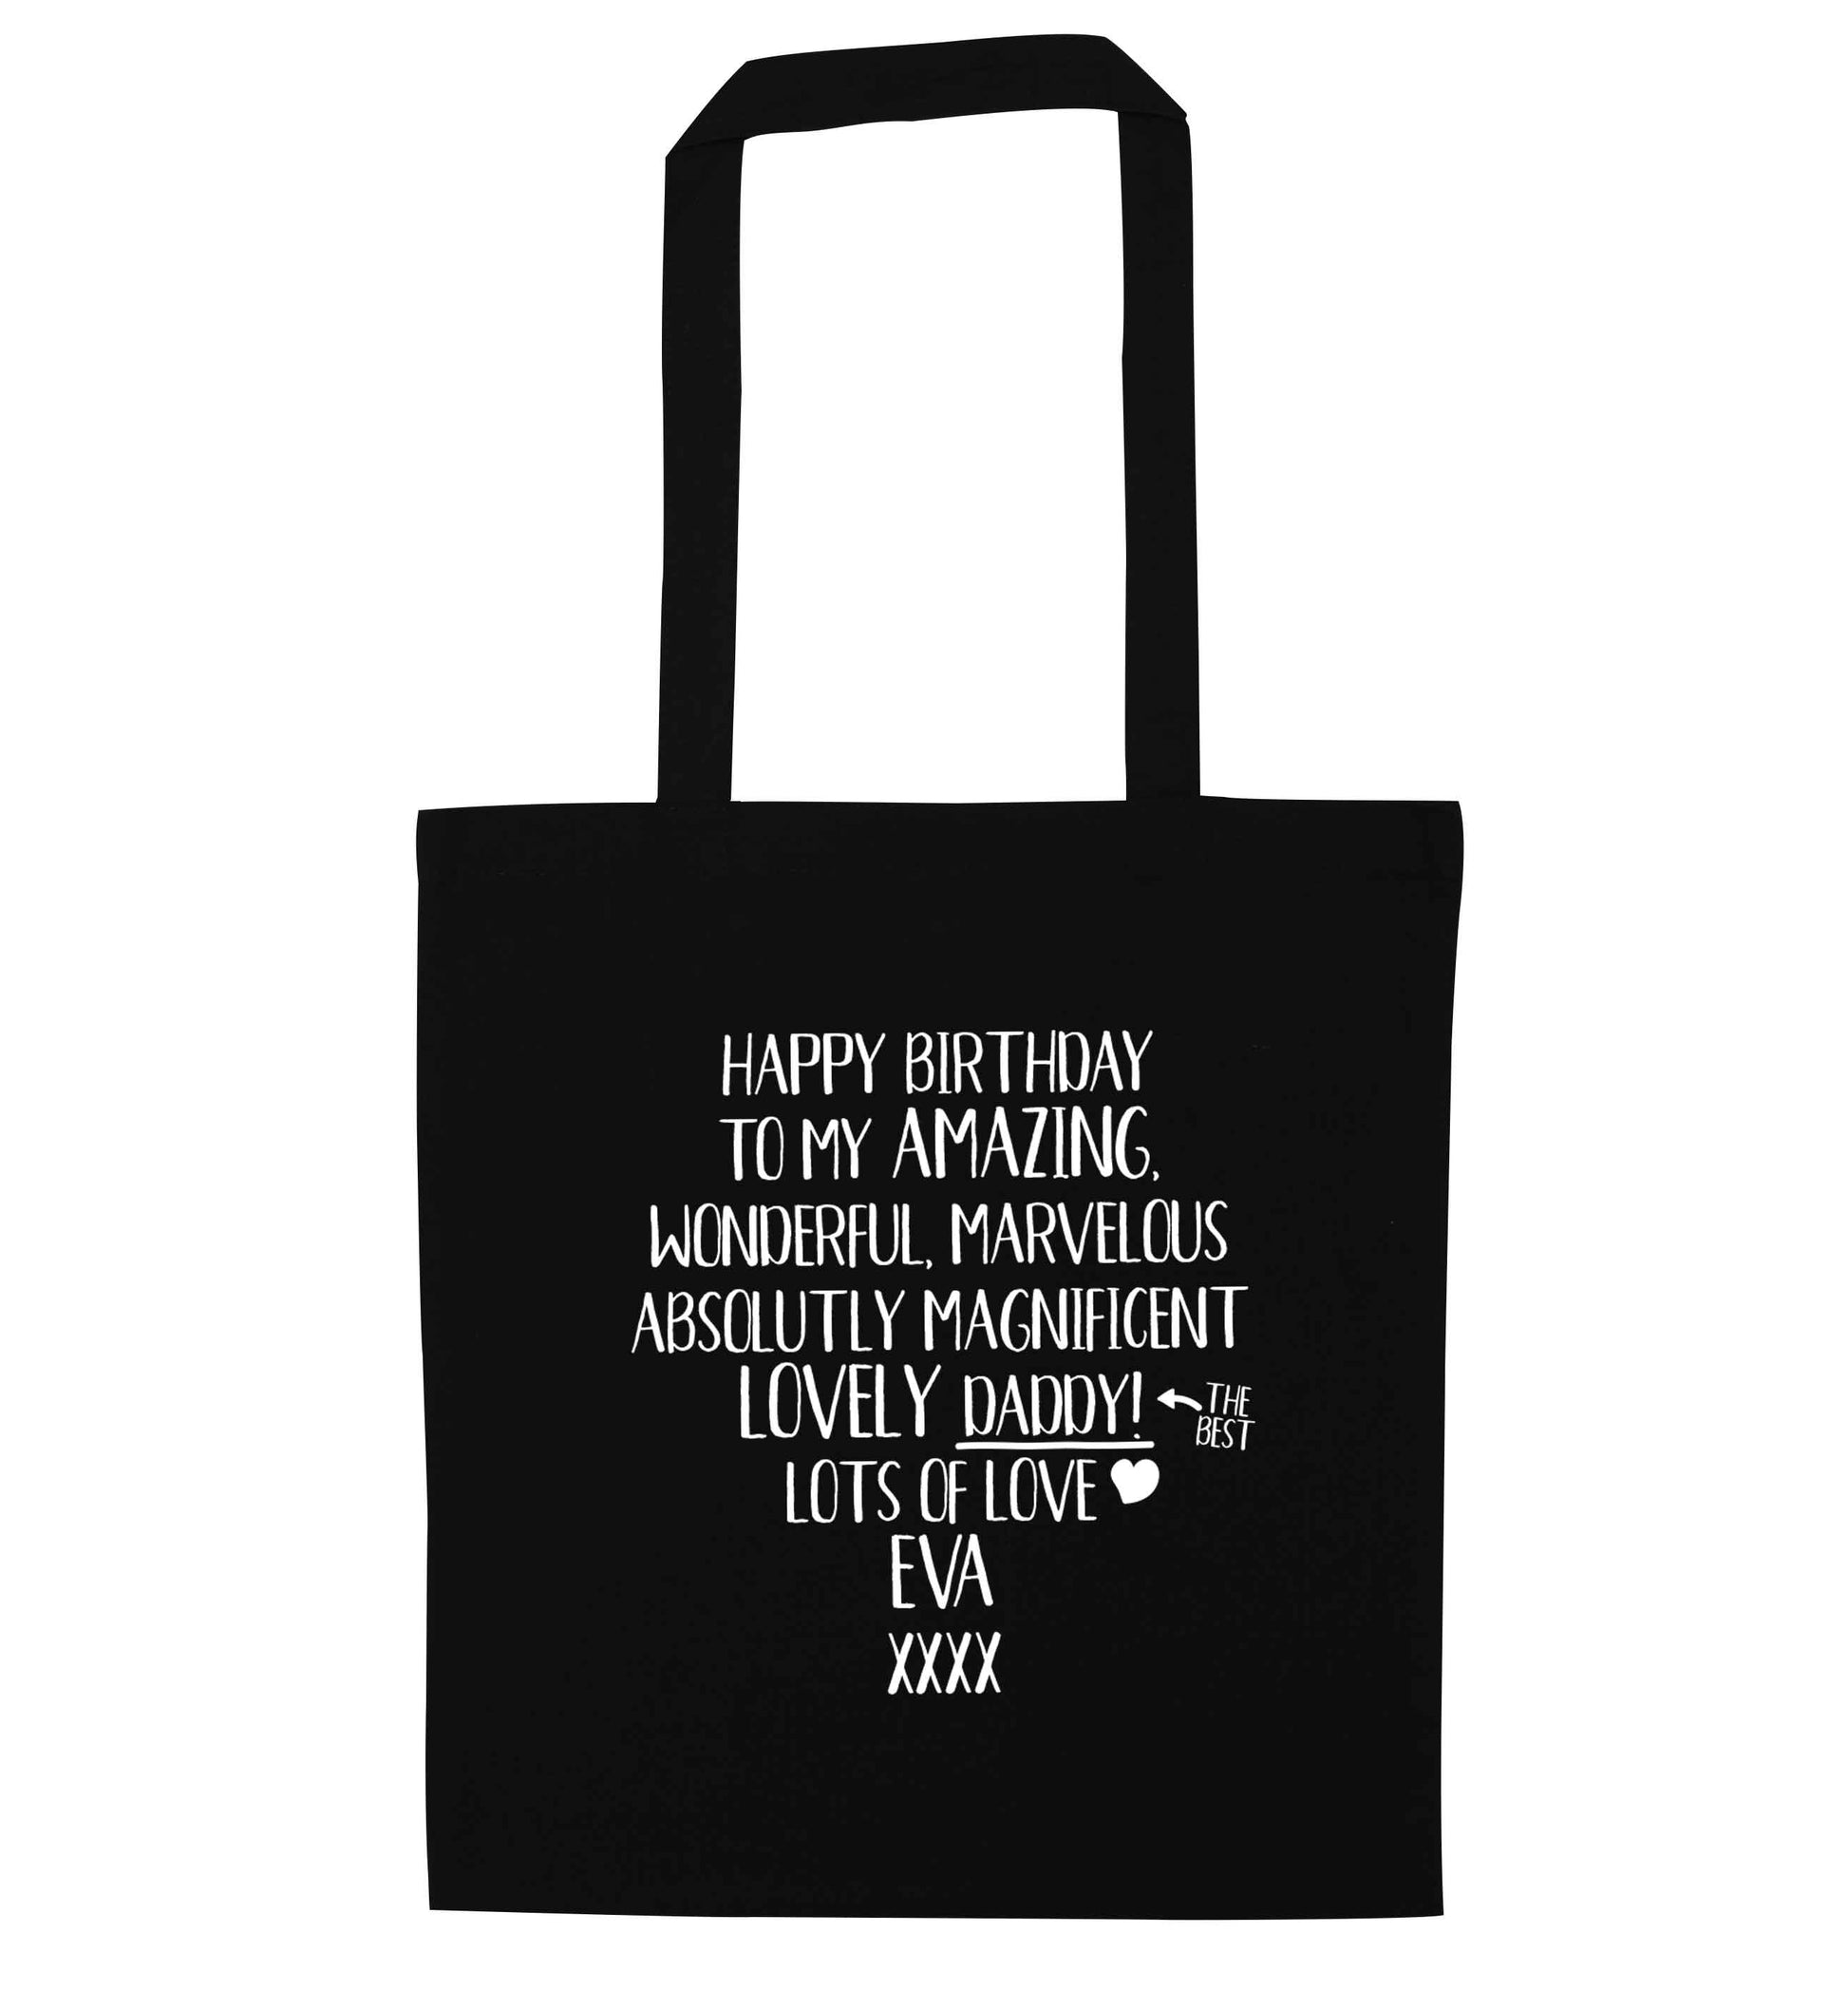 Personalised happy birthday to my amazing, wonderful, lovely daddy black tote bag